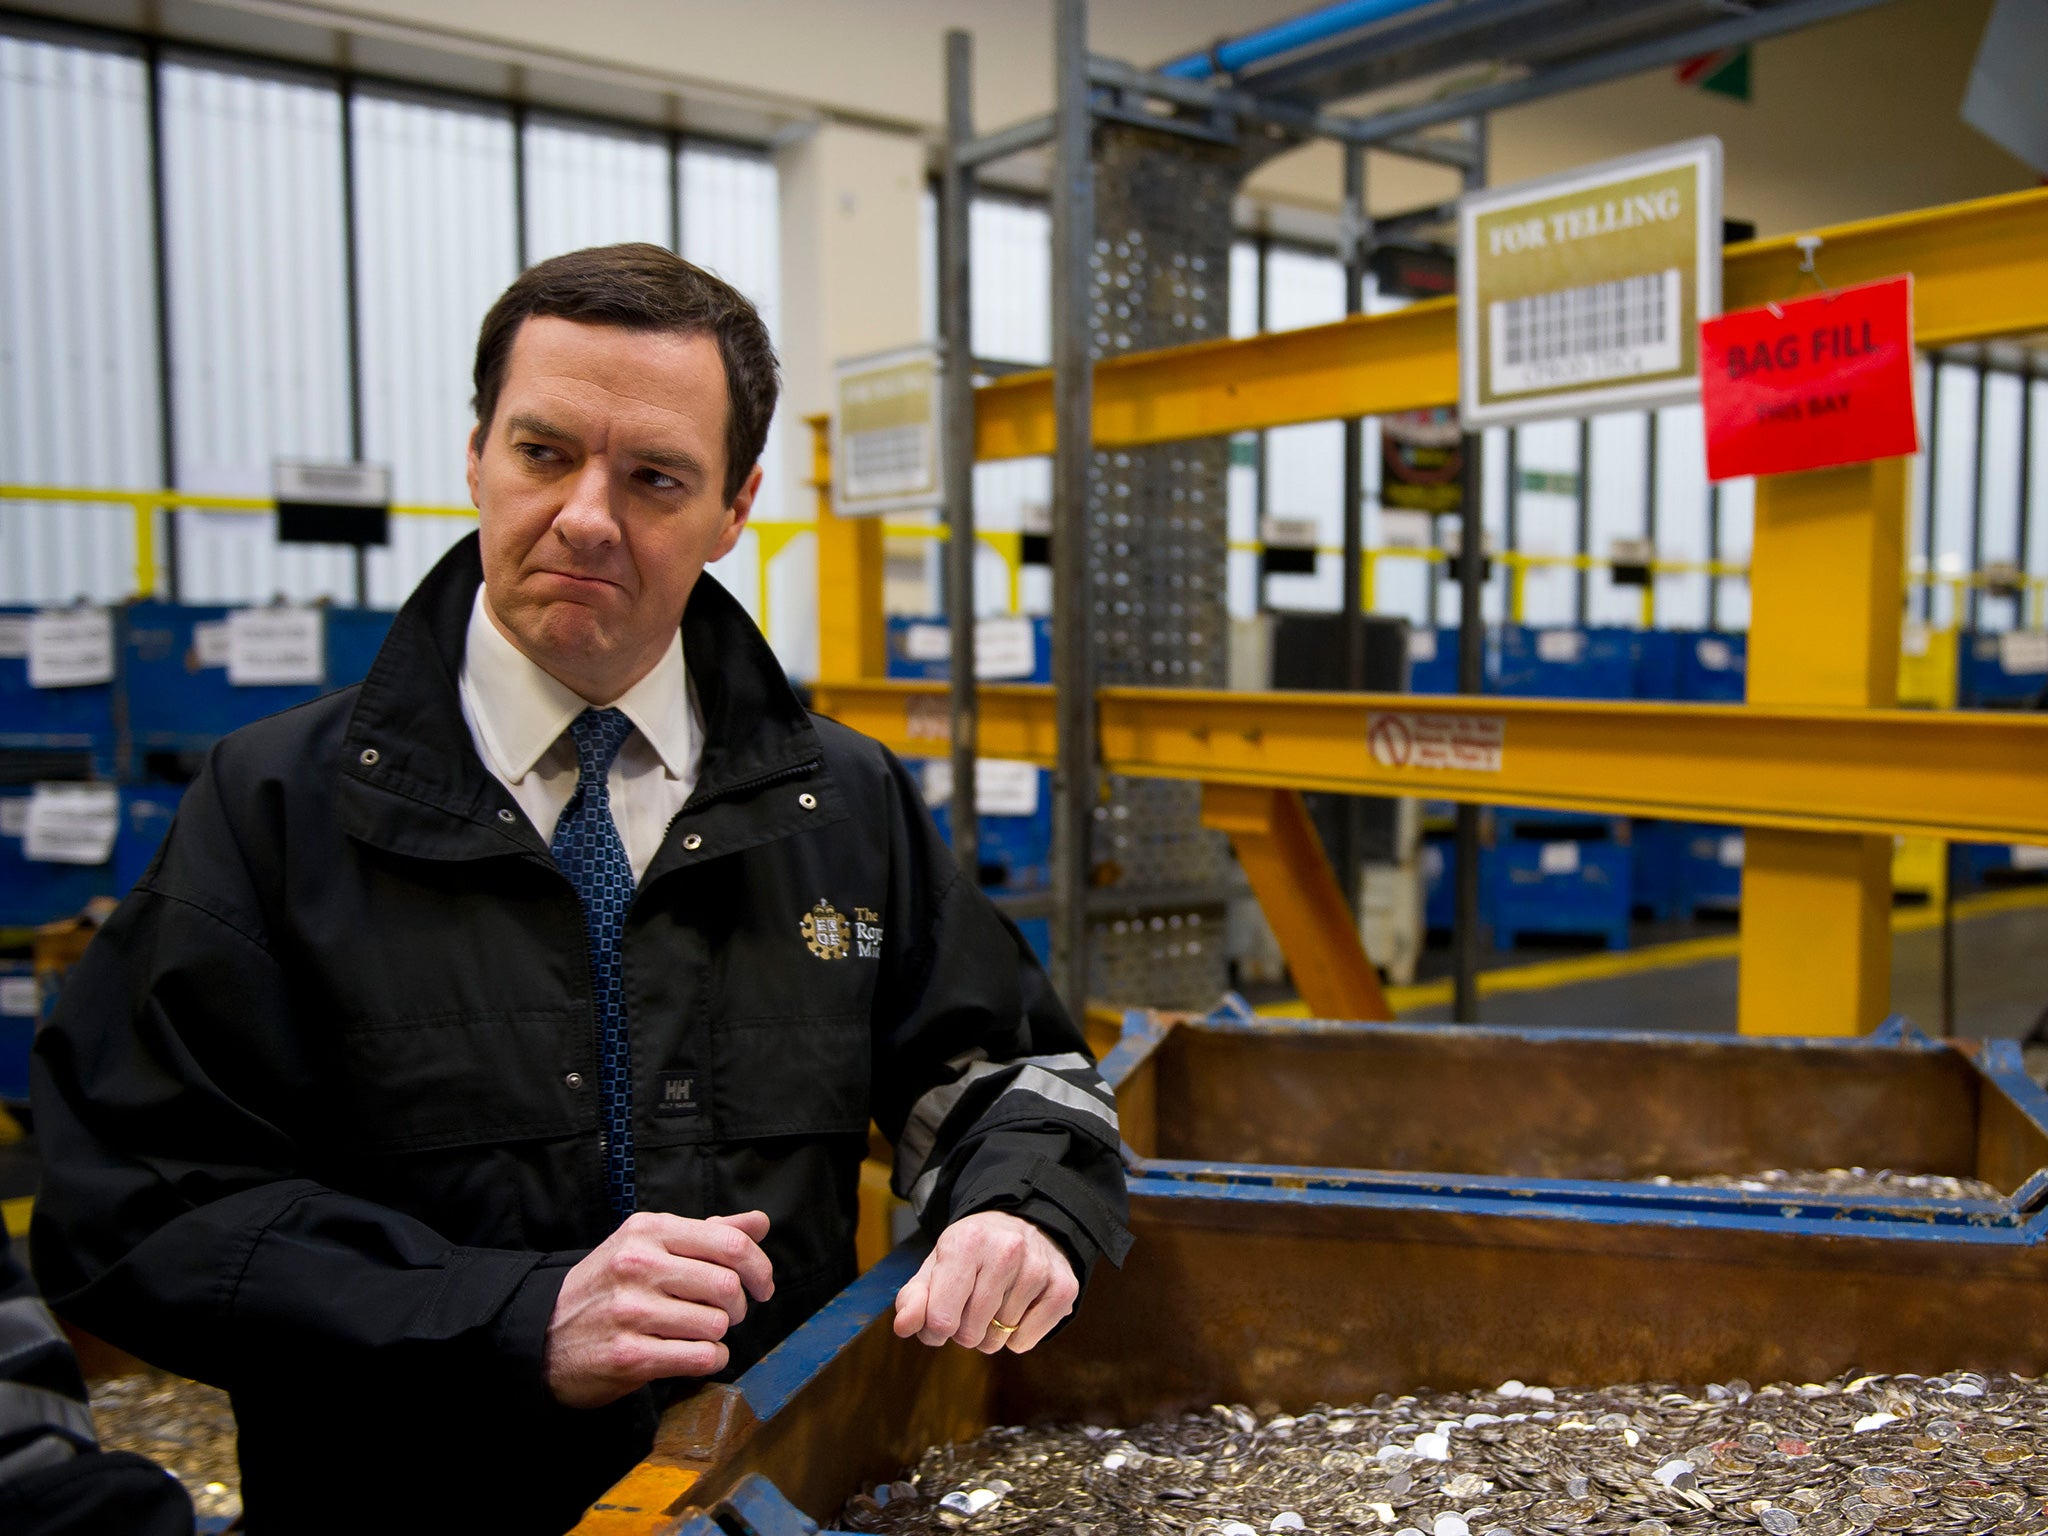 George Osborne heralded the “march of the makers” in his 2011 Budget